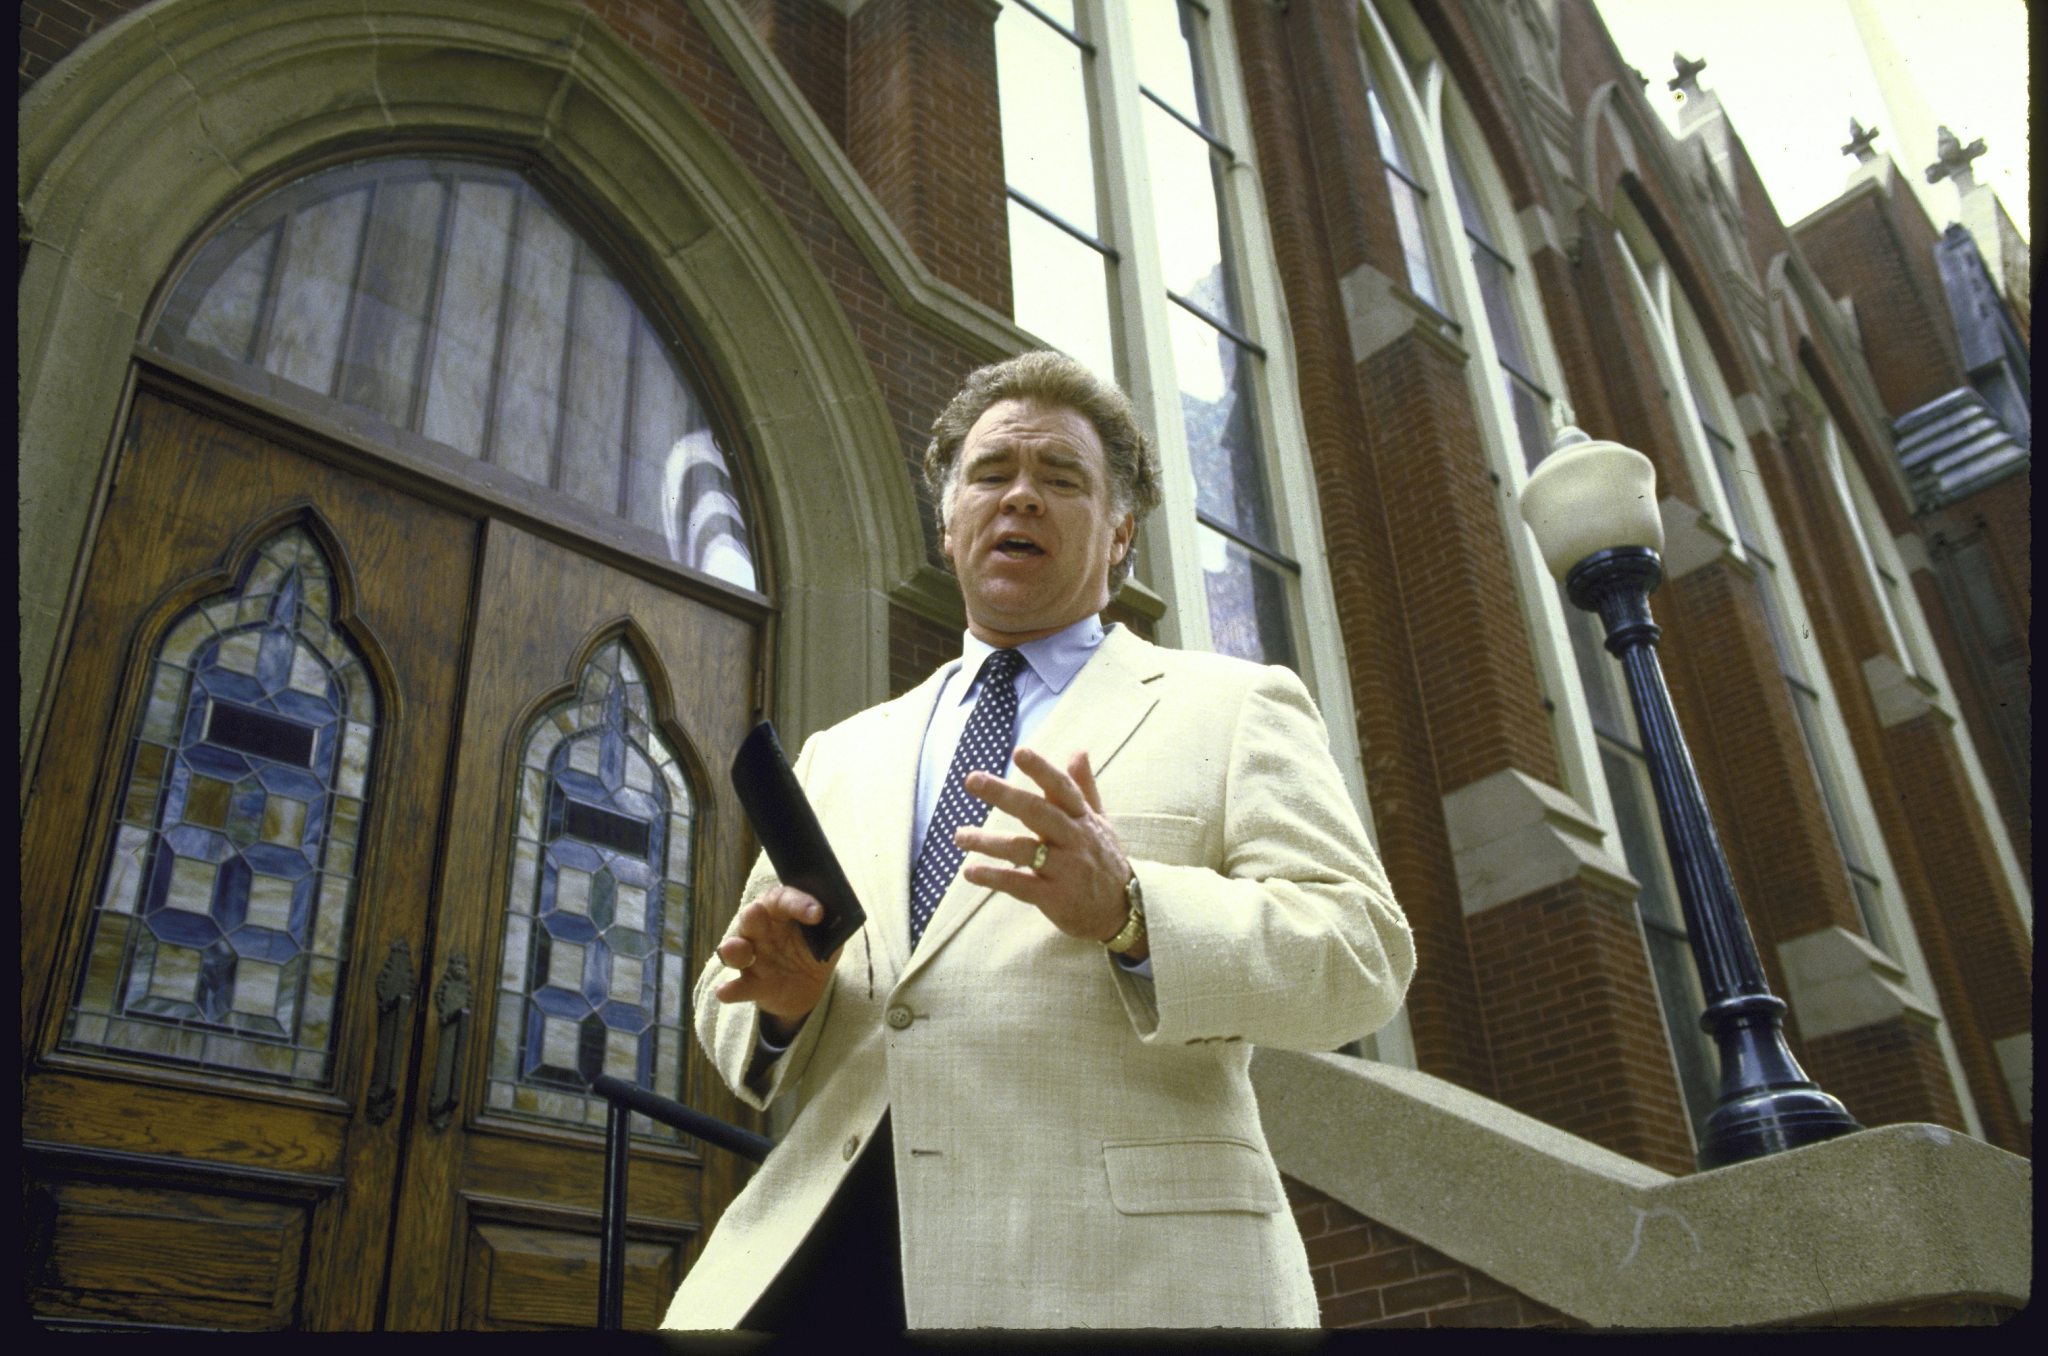 Unearthed Tapes Letters Show Southern Baptist Leaders Support For